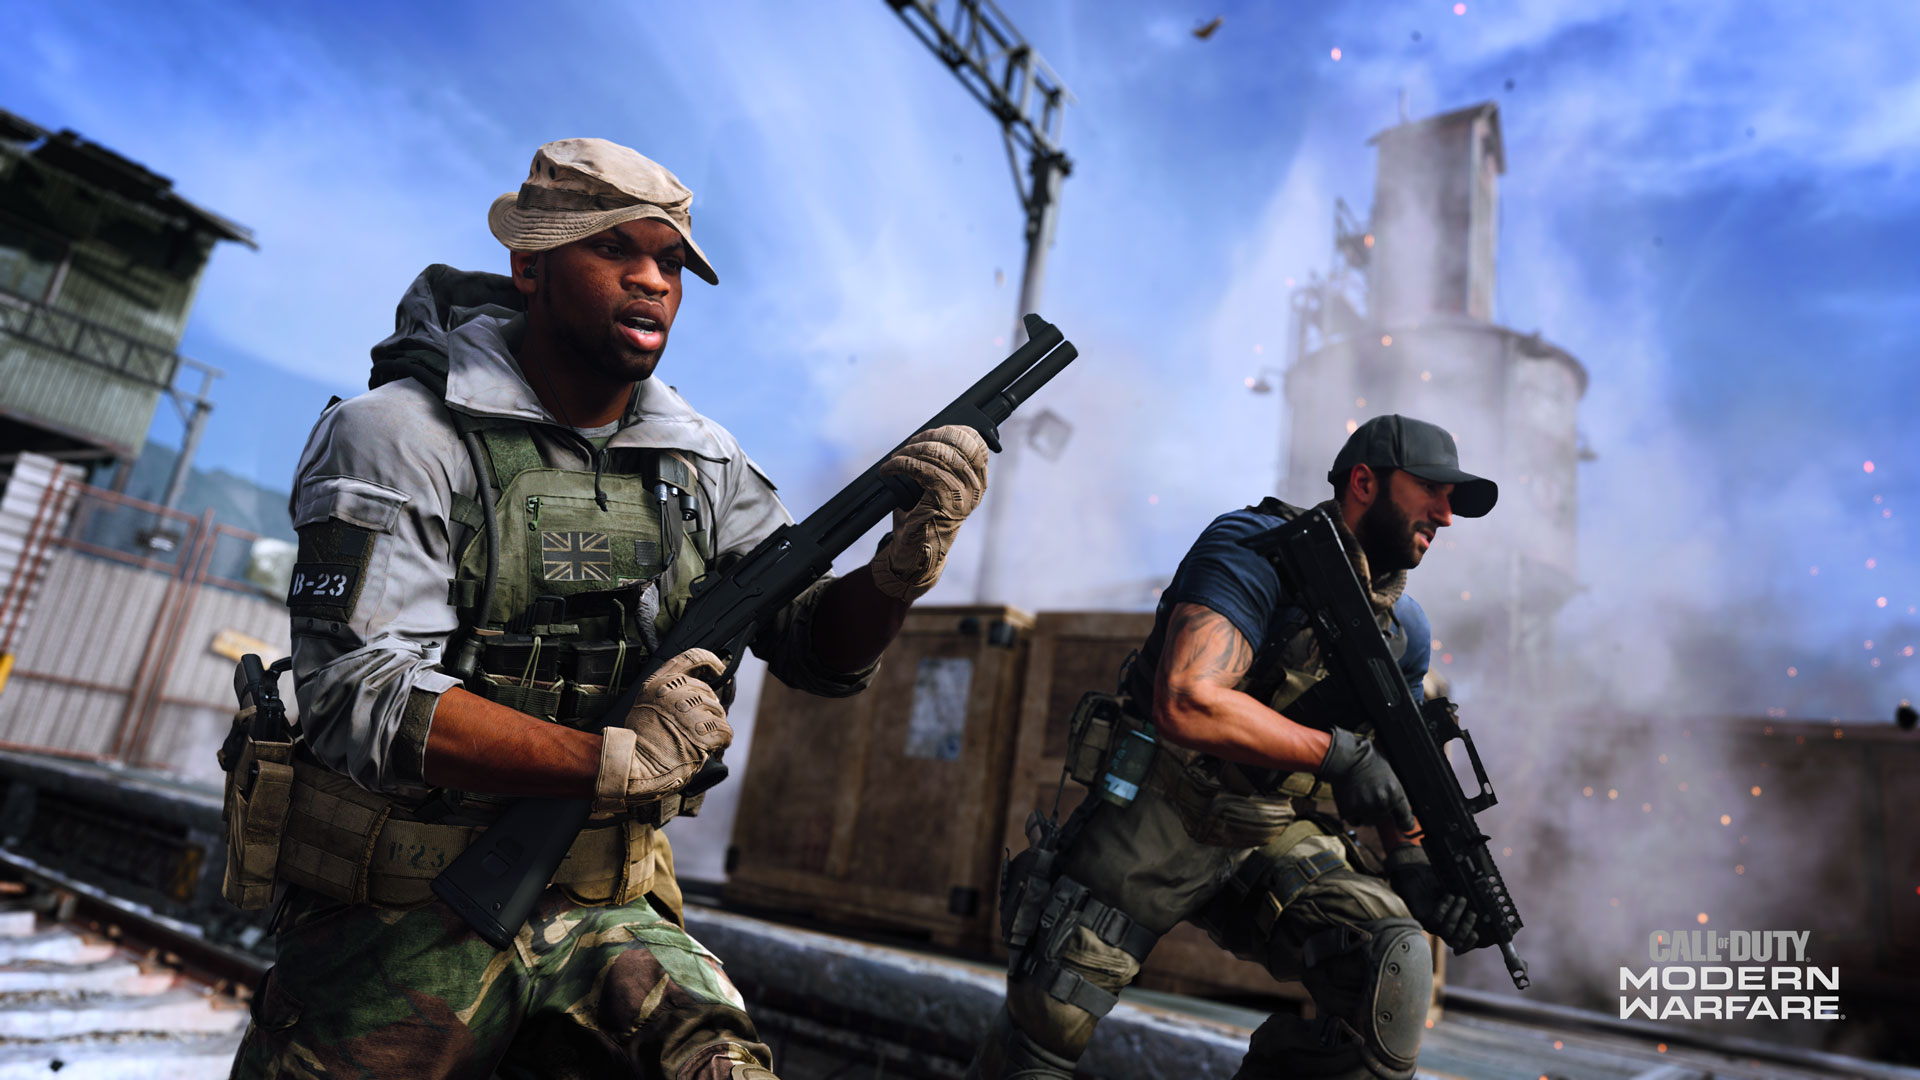 Modern Warfare: PS4 games including Call of Duty to feature cross-play